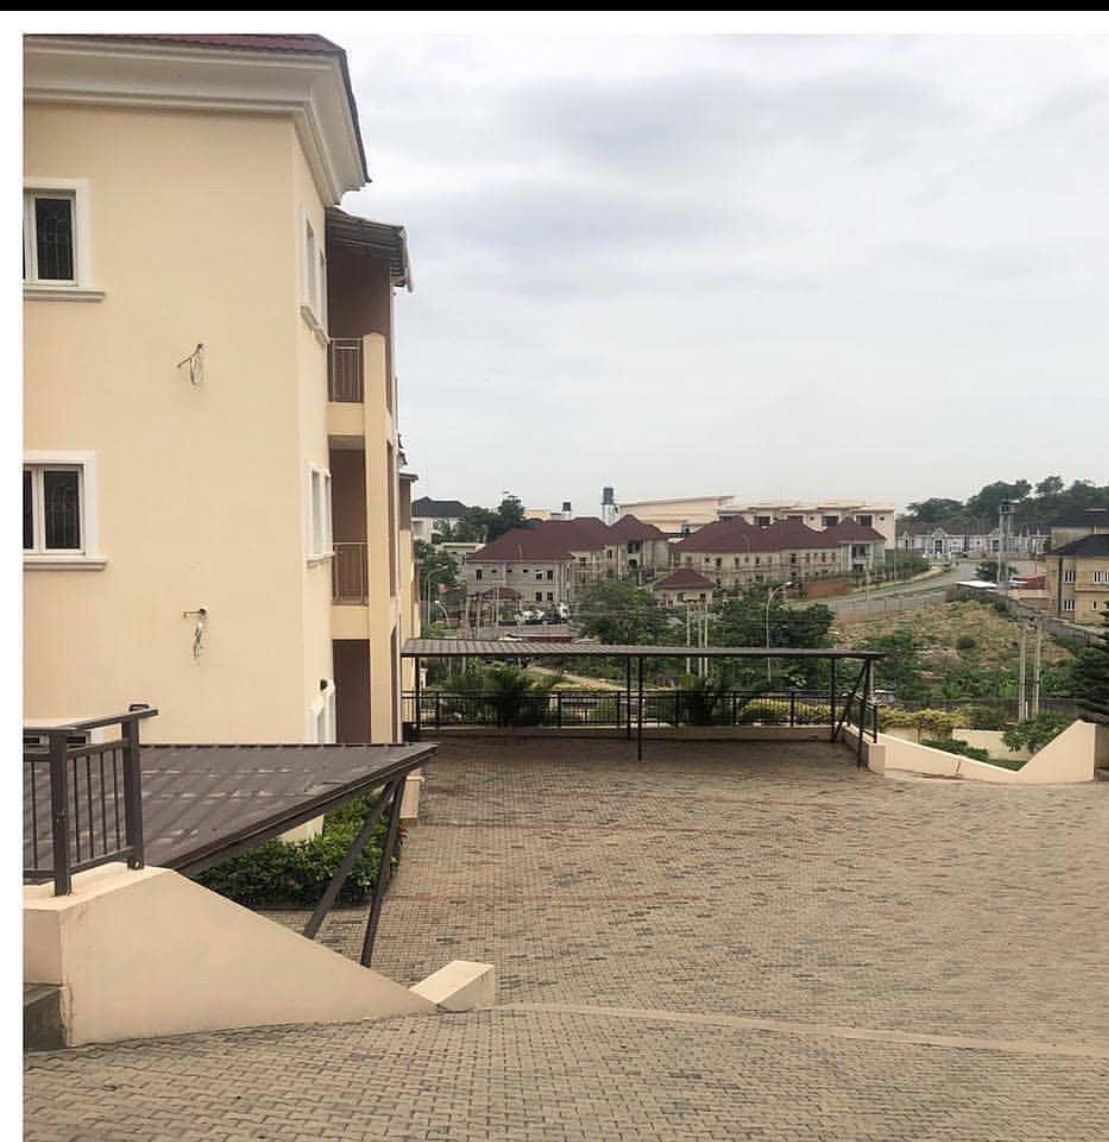 FOR SALE 
DESCRIPTION 6 units of 5 bedroom terrace with one room BQ each. 

📍Asokoro main Abuja 🇳🇬

PRICE-1.6B NAIRA 

PROFESSIONAL FEES 5%